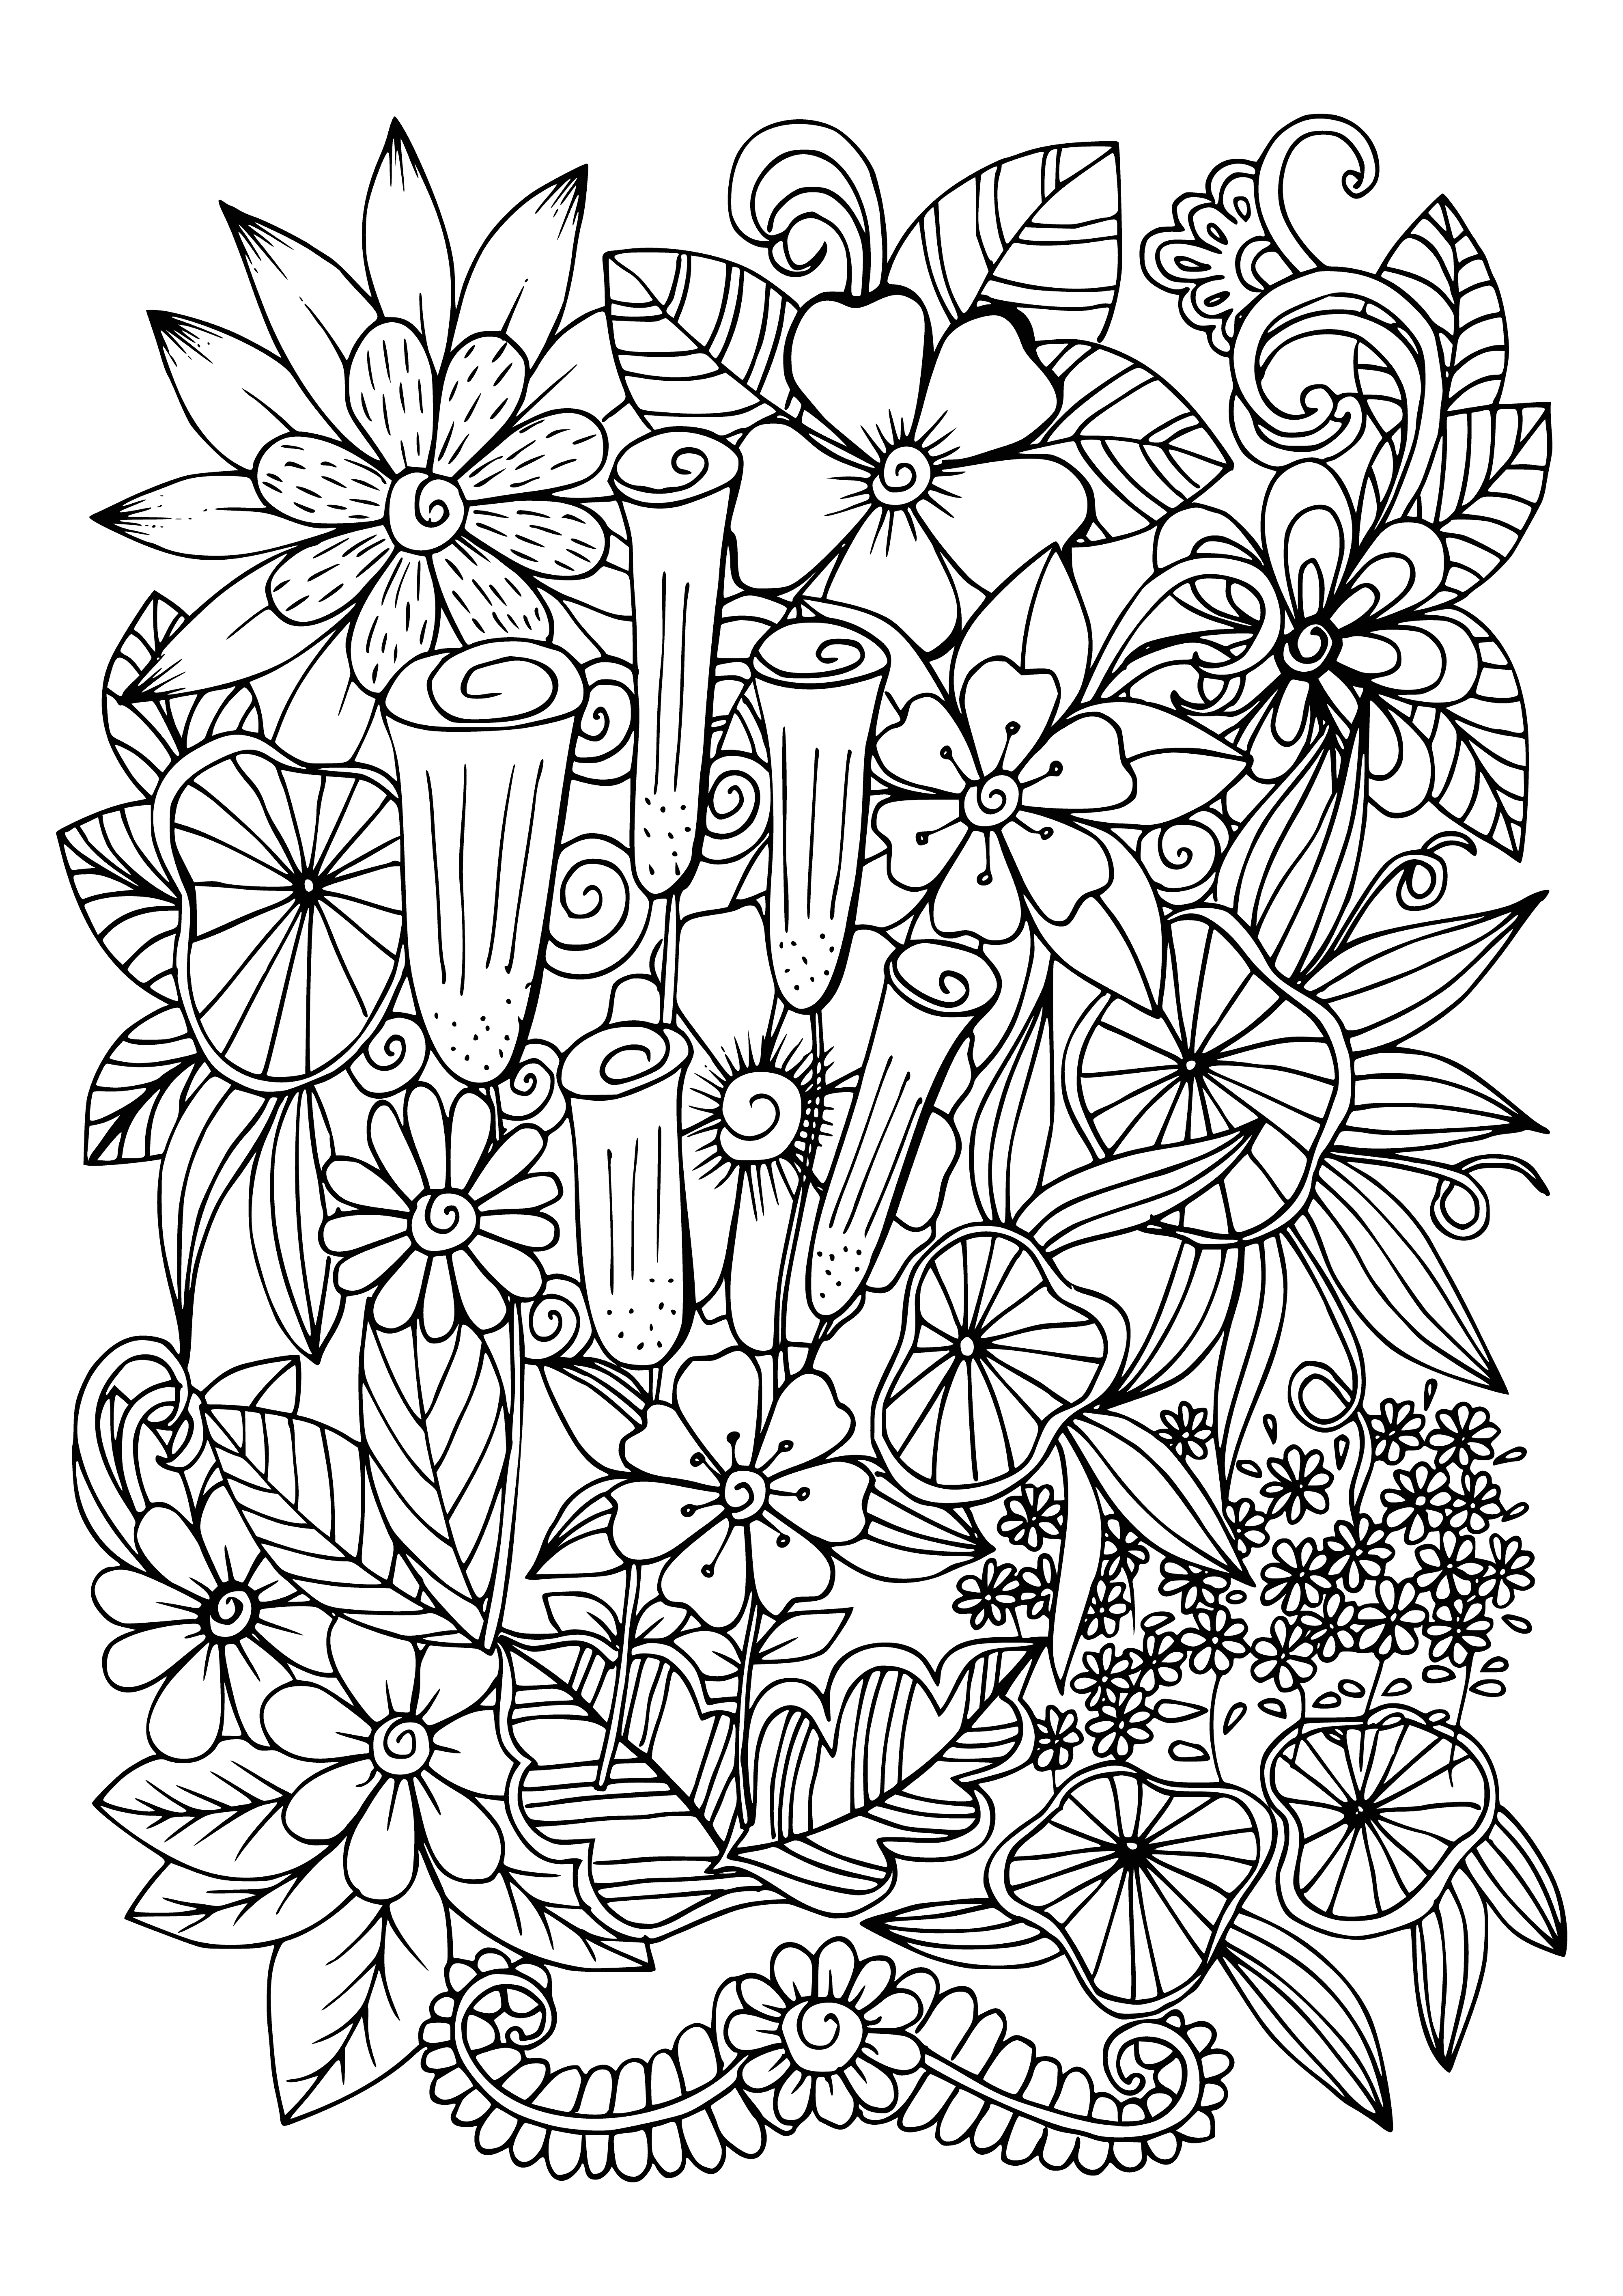 coloring page: An array of multi-colored flower petals & intricate designs bloom in a variety of patterns.